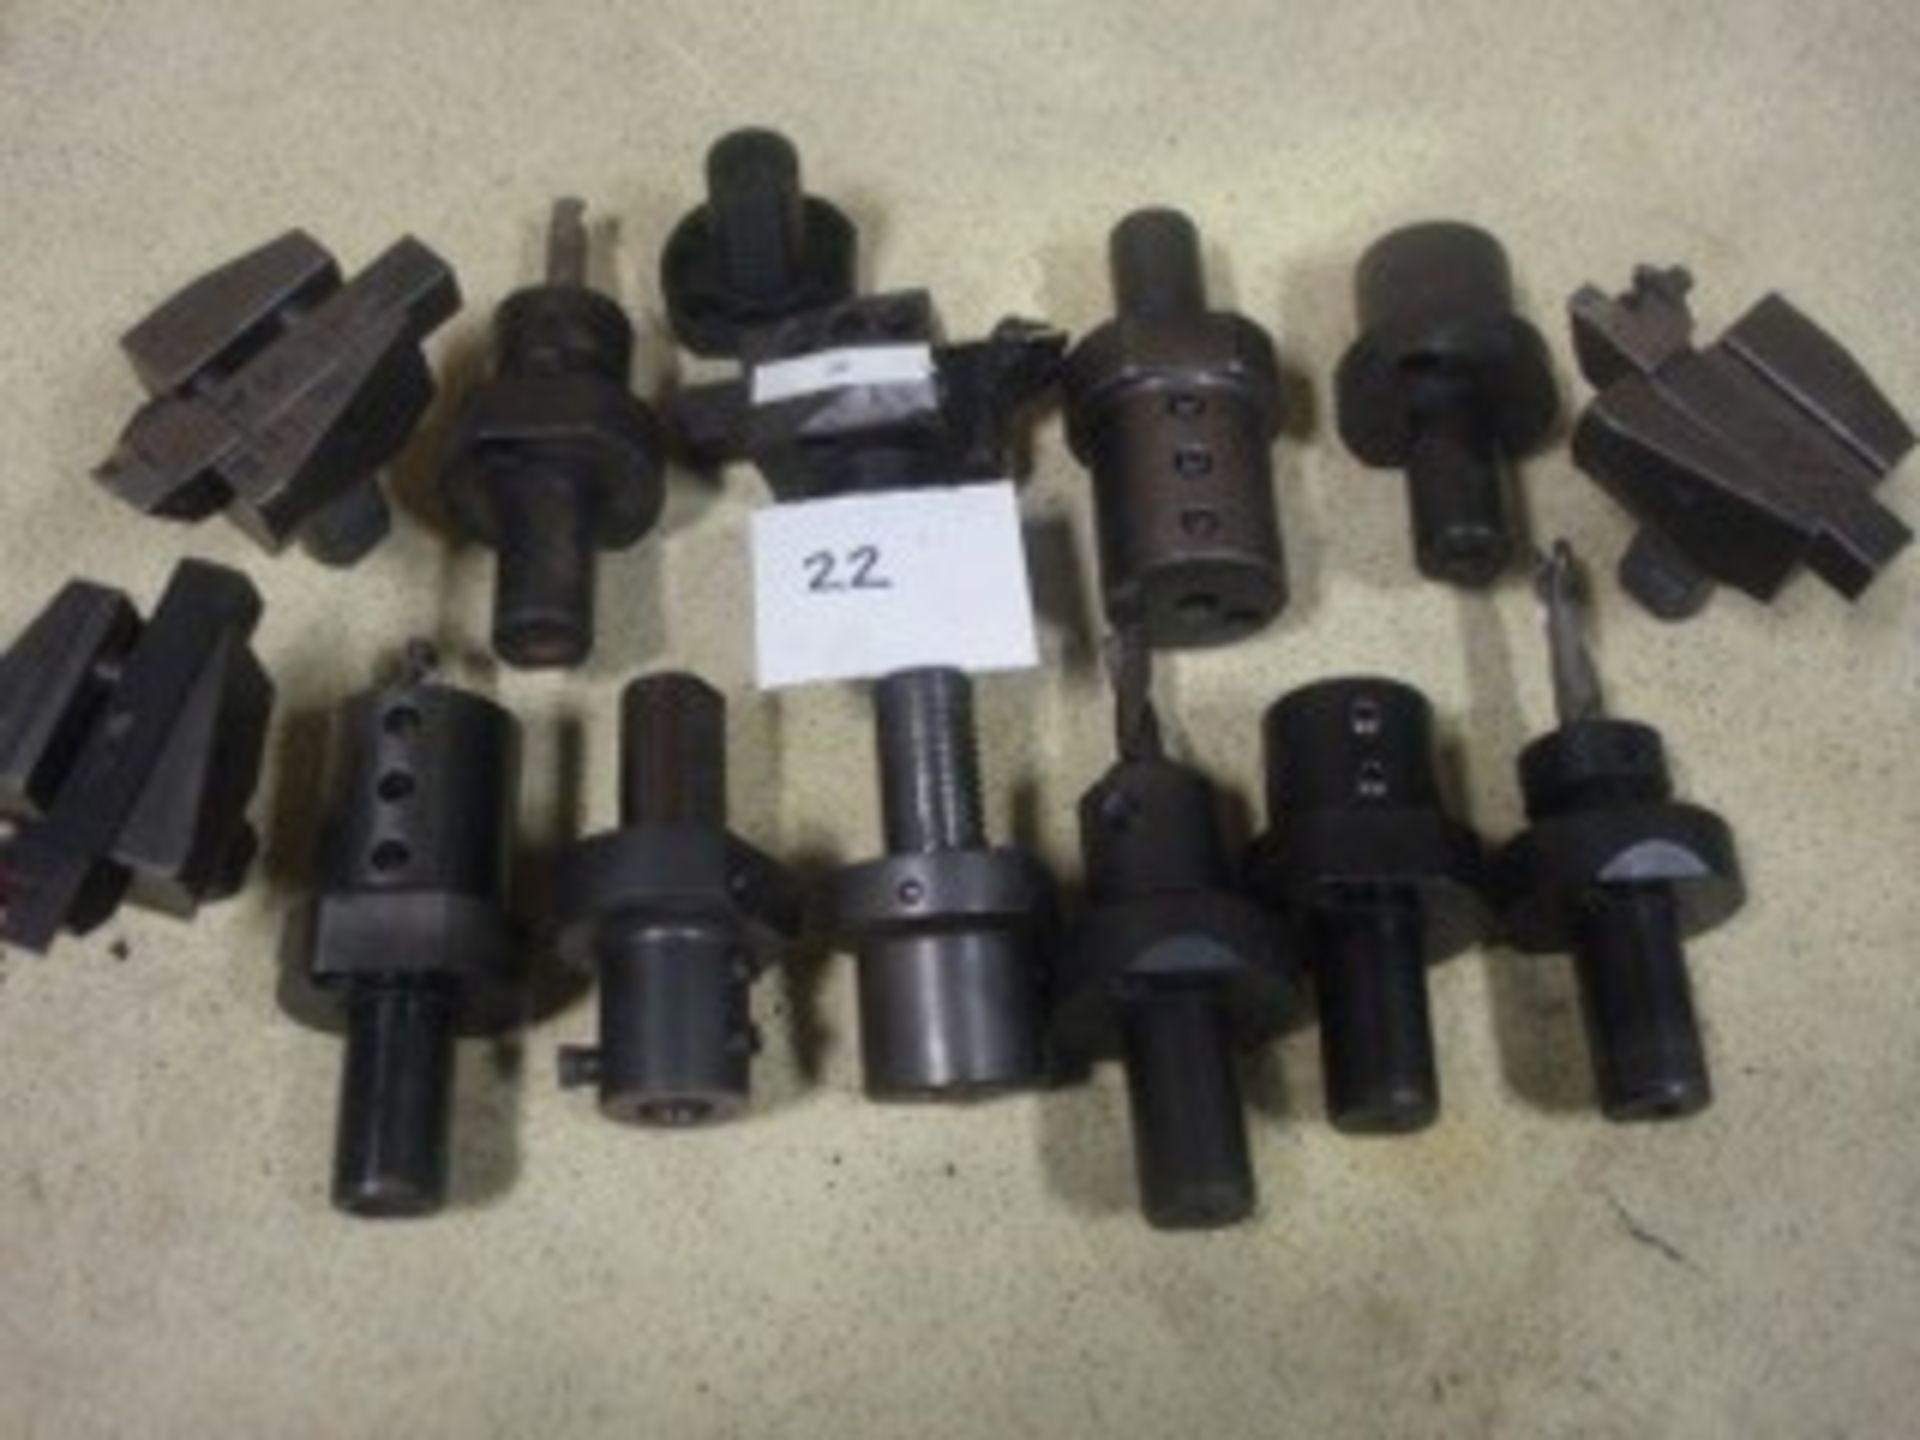 Lot of VDI Turret tool holders for cnc lathe 1.200” Shank - Image 2 of 2